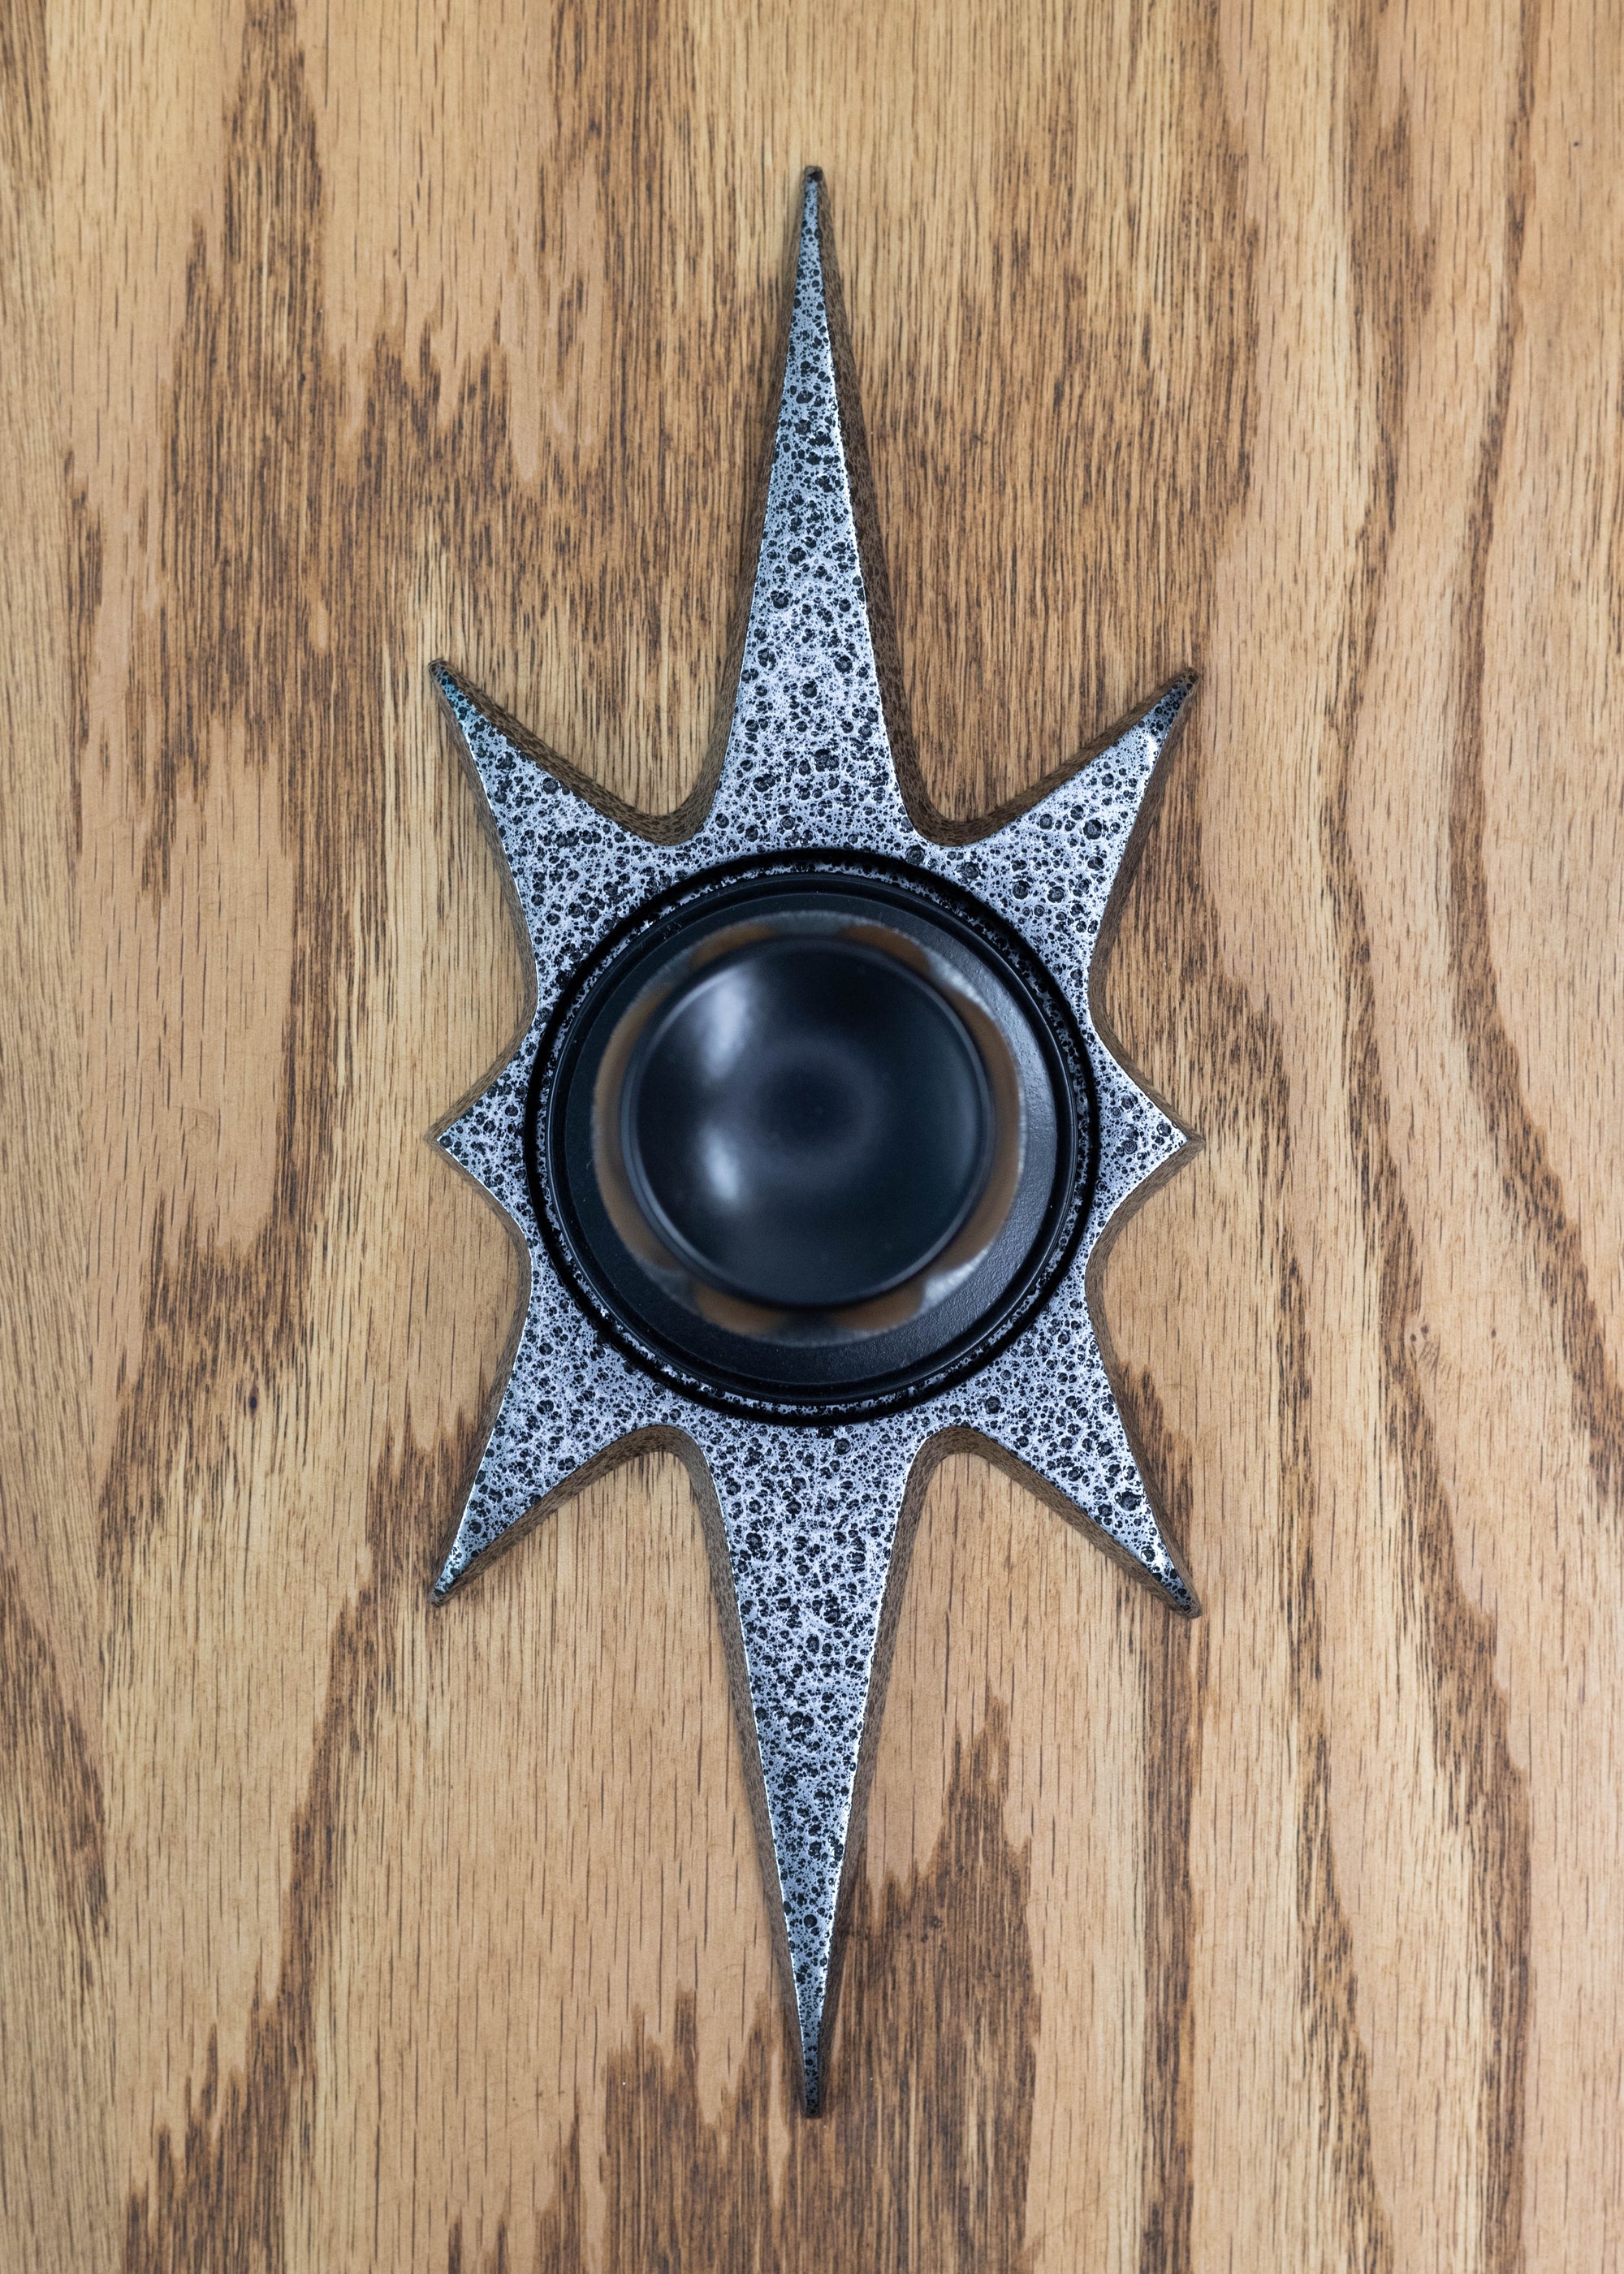 A starburst doorknob escutcheon with a black door knob. (knob not for sale) It is a dark silver, almost gunmetal color with a porous/pitted texture that is black. The starburst consists of two long points on top and bottom, 2 very short points horizontal, and 4 medium points diagonal.